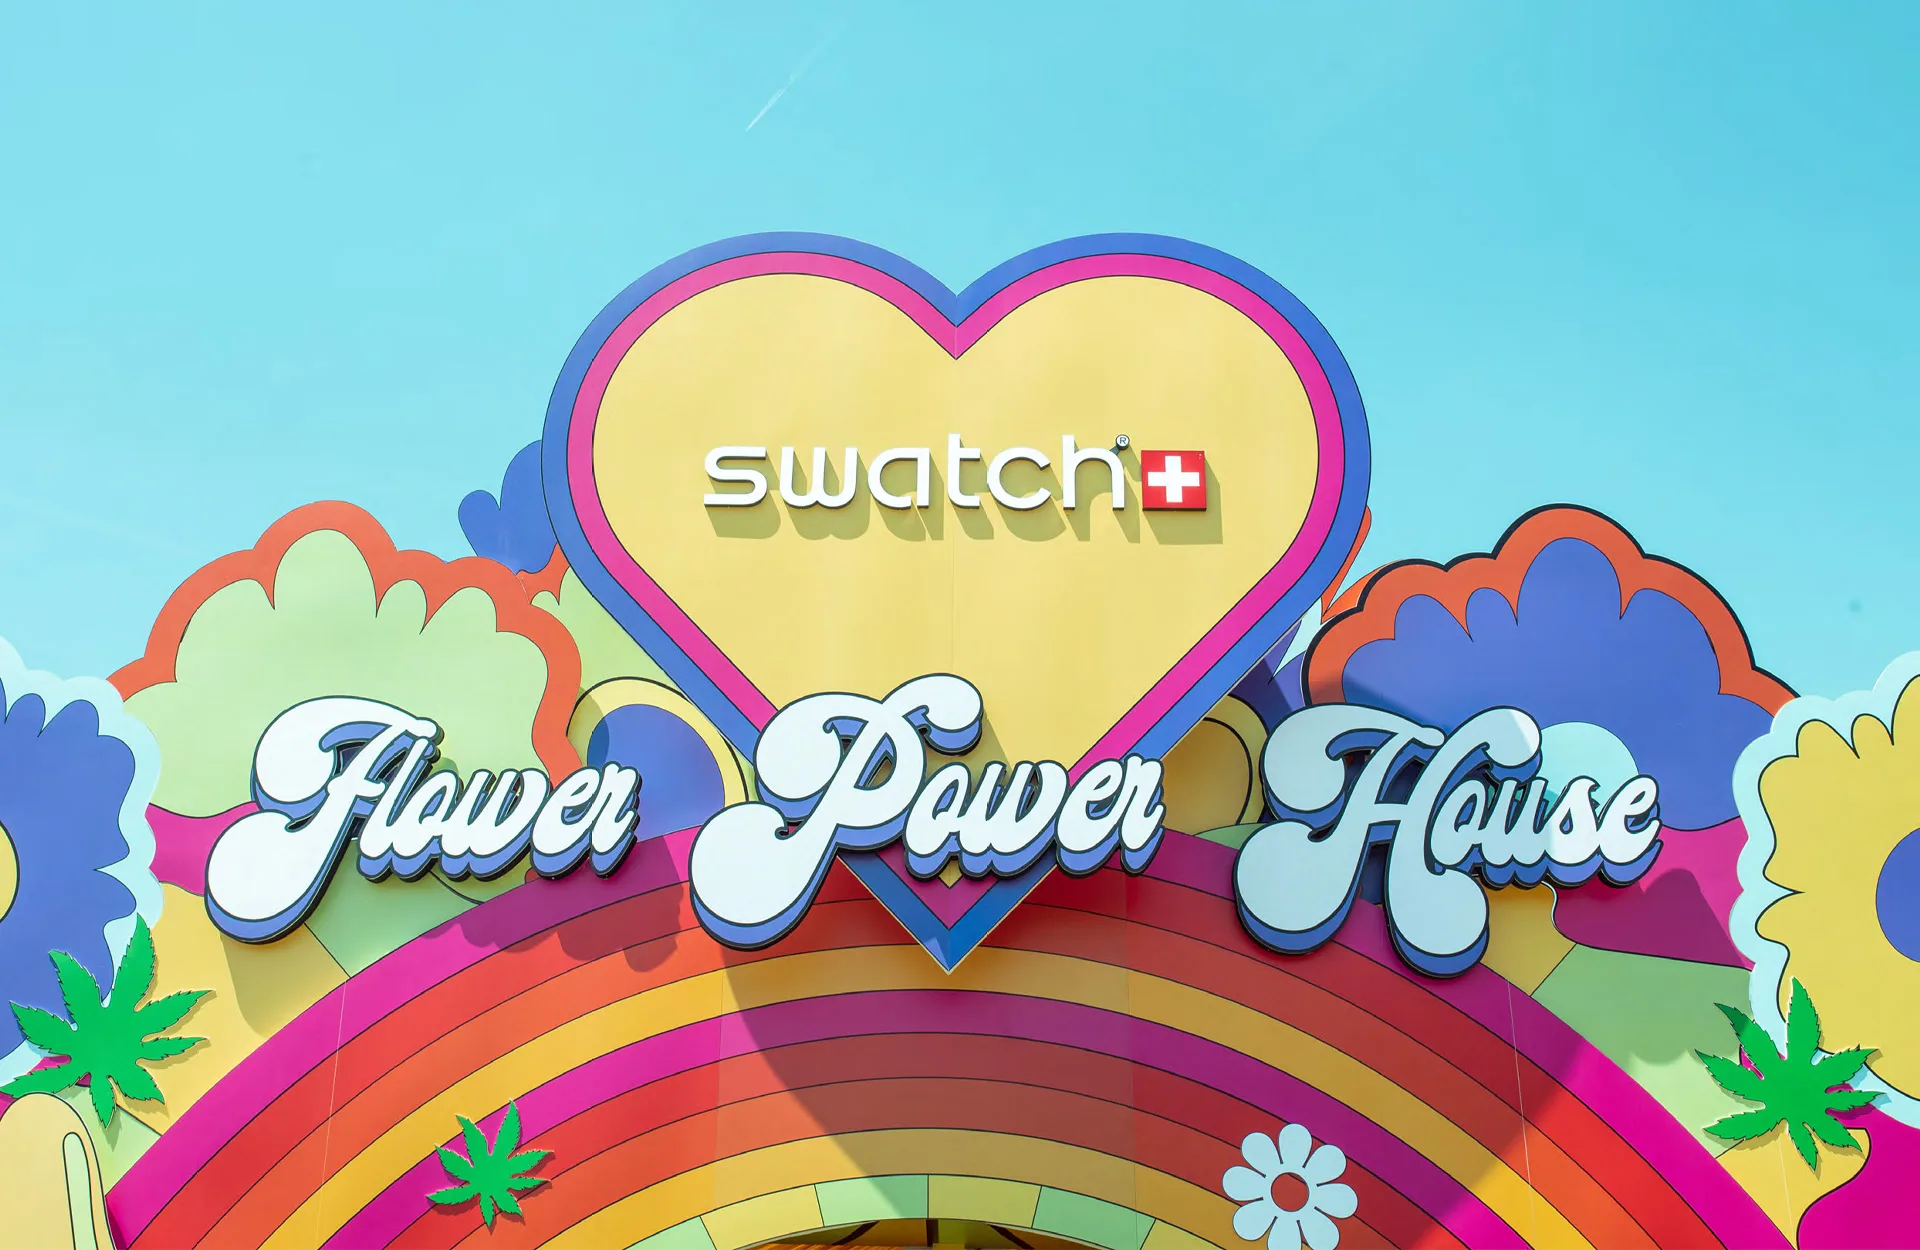 Swatch embraces its love for music by taking the stake at three international festivals